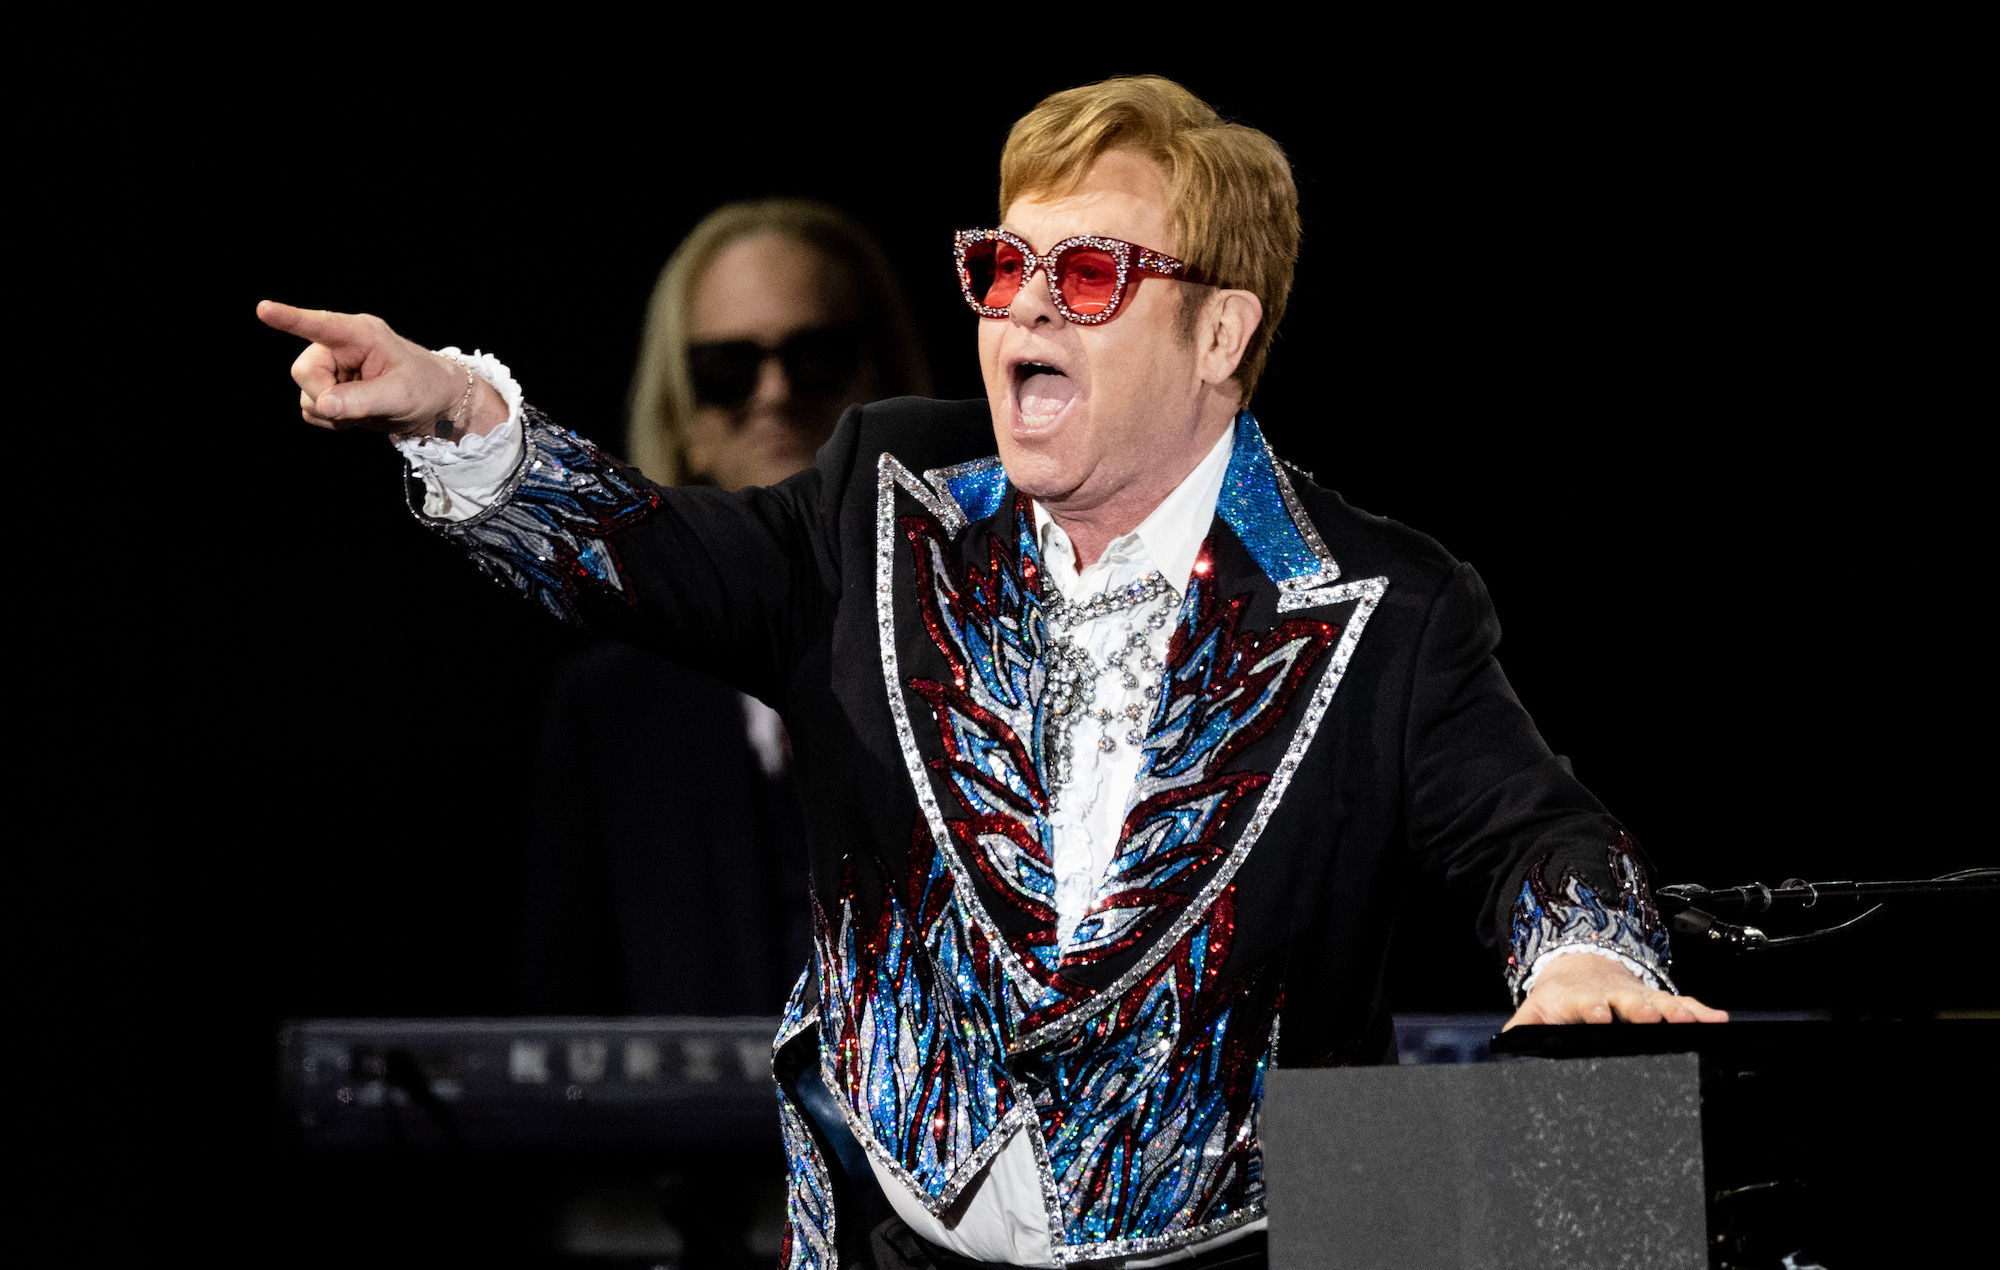 Elton John Ends Farewell Tour with Powerful Performance of “Goodbye Yellow Brick Road”